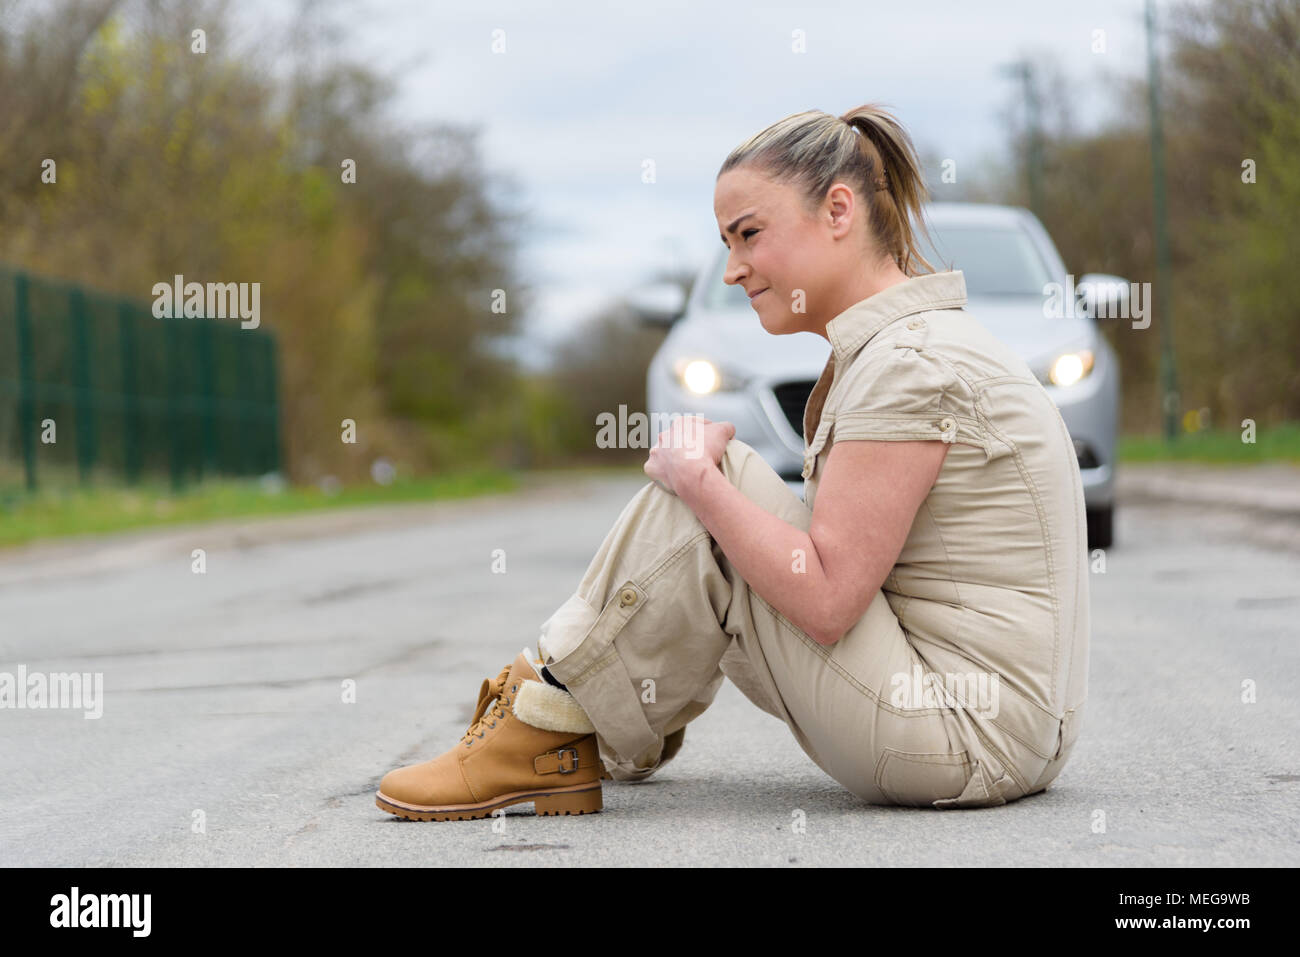 An injured young woman experiencing severe pain caused by knee sprain or fracture after car accident. Stock Photo